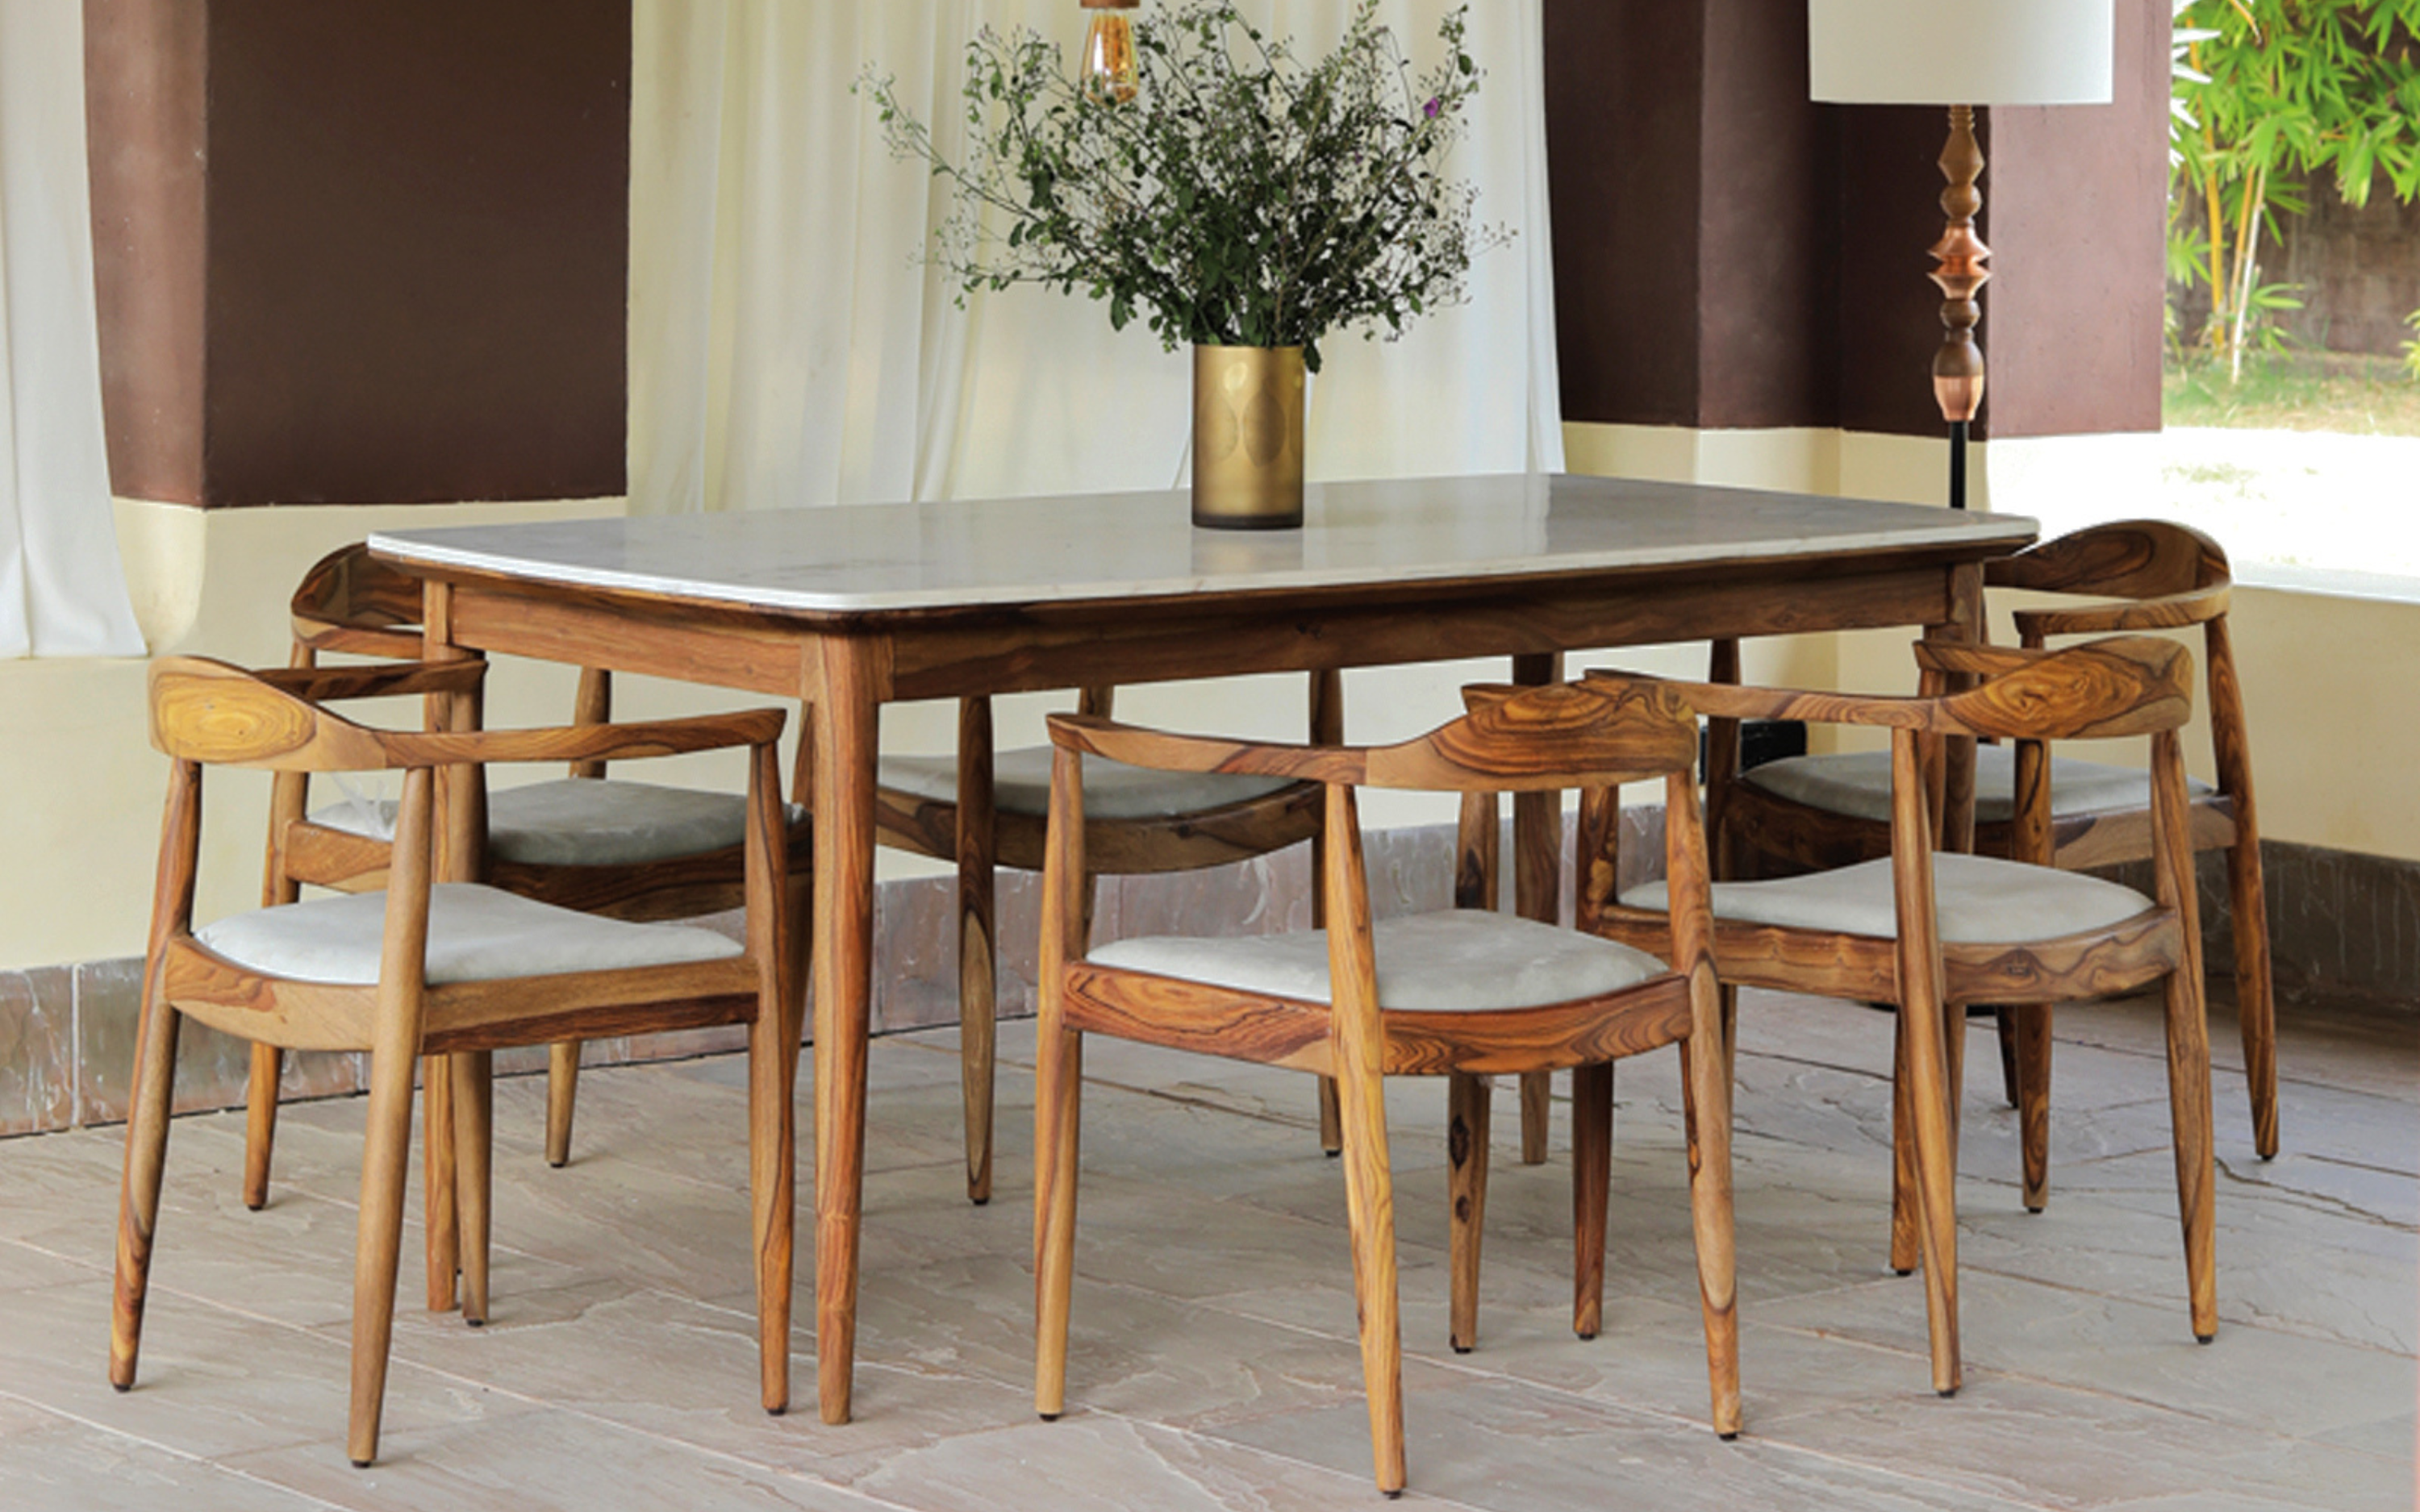 Dado Marble Top Dining Table 6 seater. Orange Tree Home 